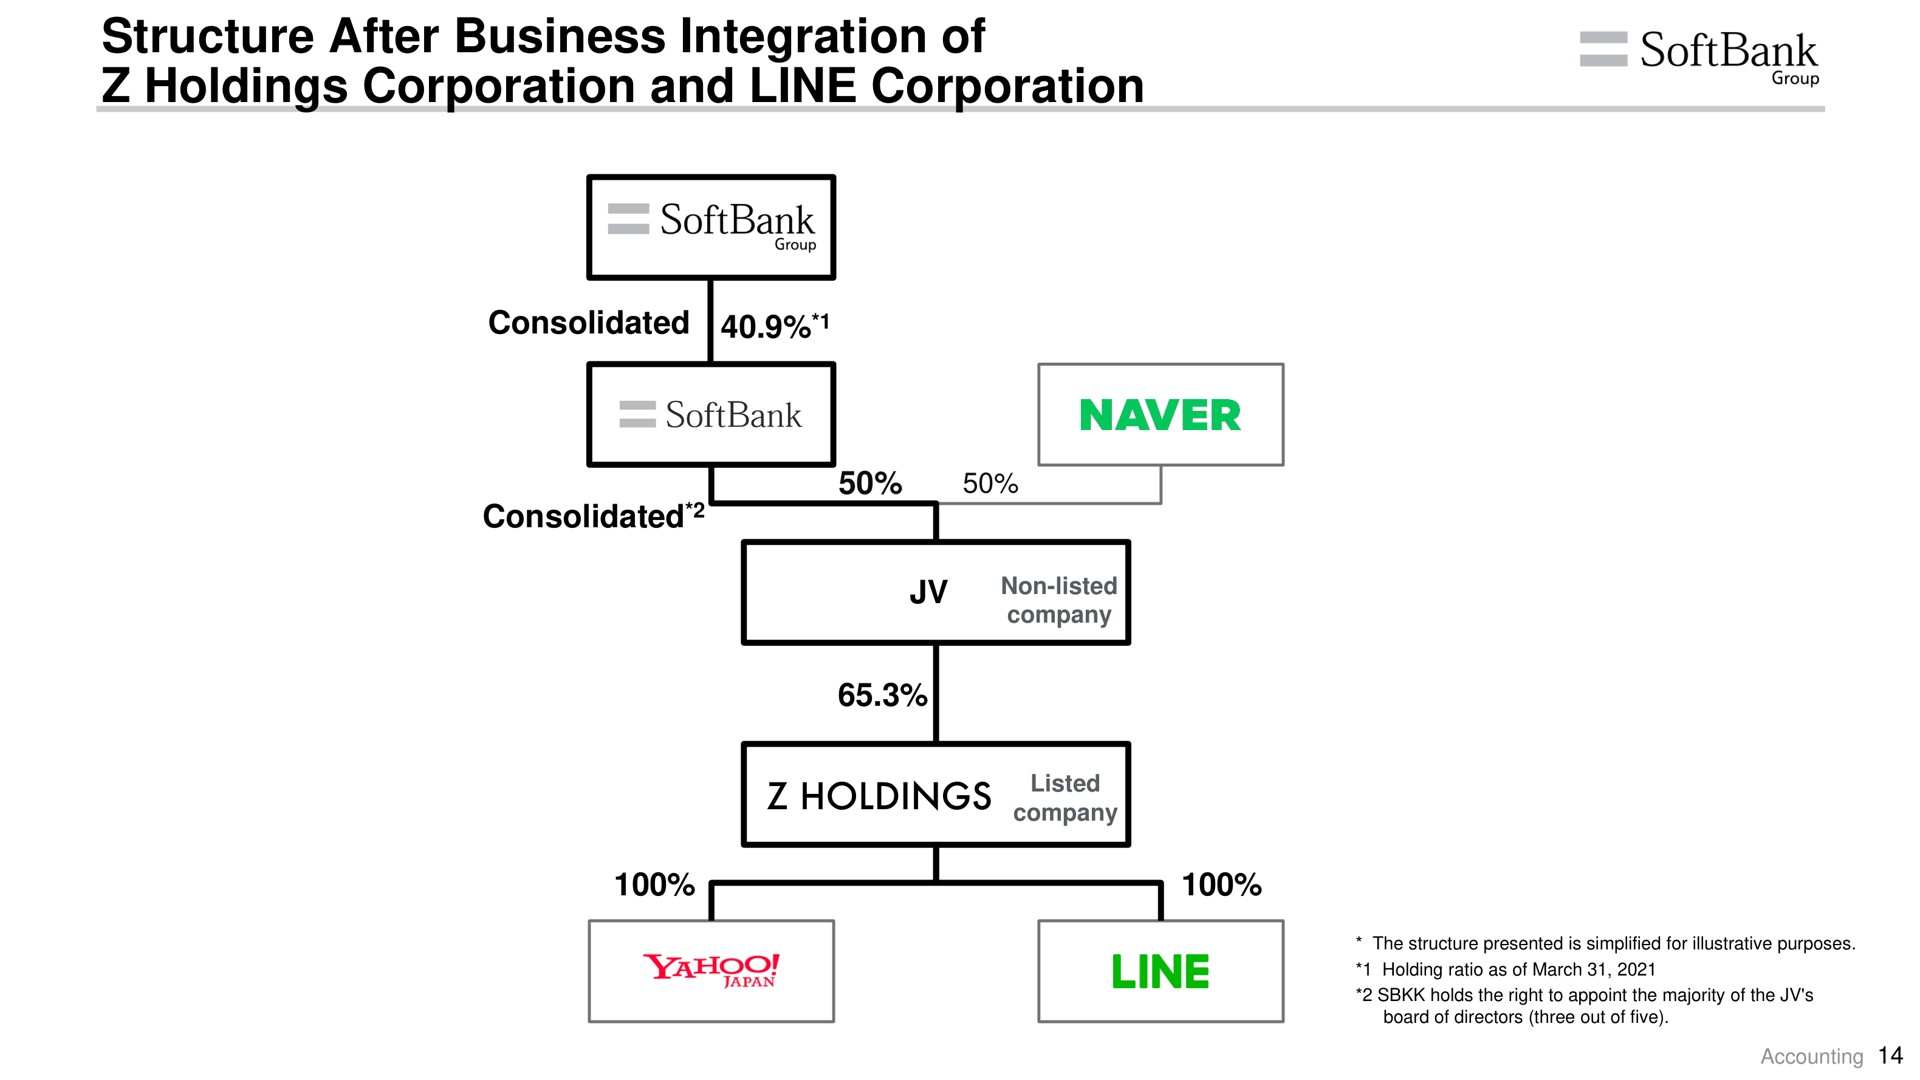 structure after business integration of holdings corporation and line corporation | SoftBank